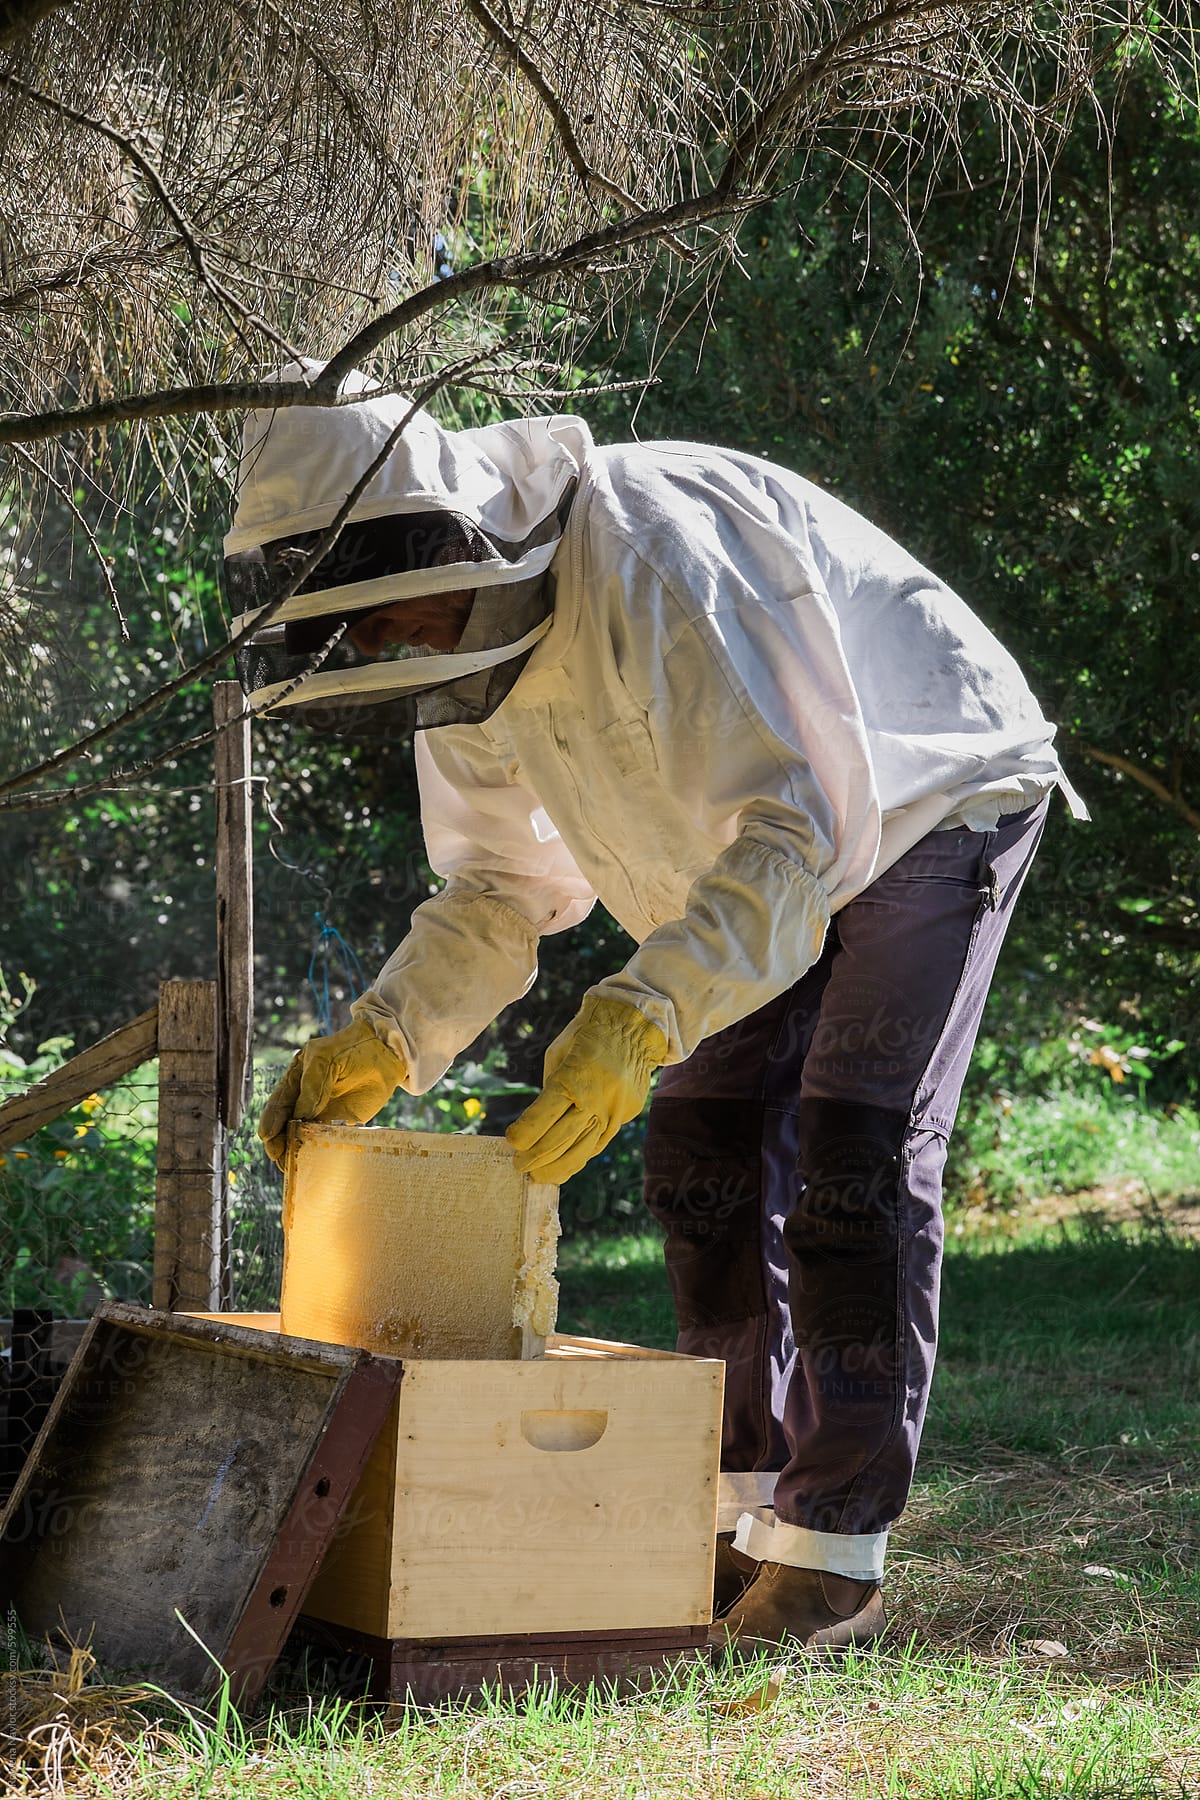 Bee Keeper harvesting honey from Bee hives